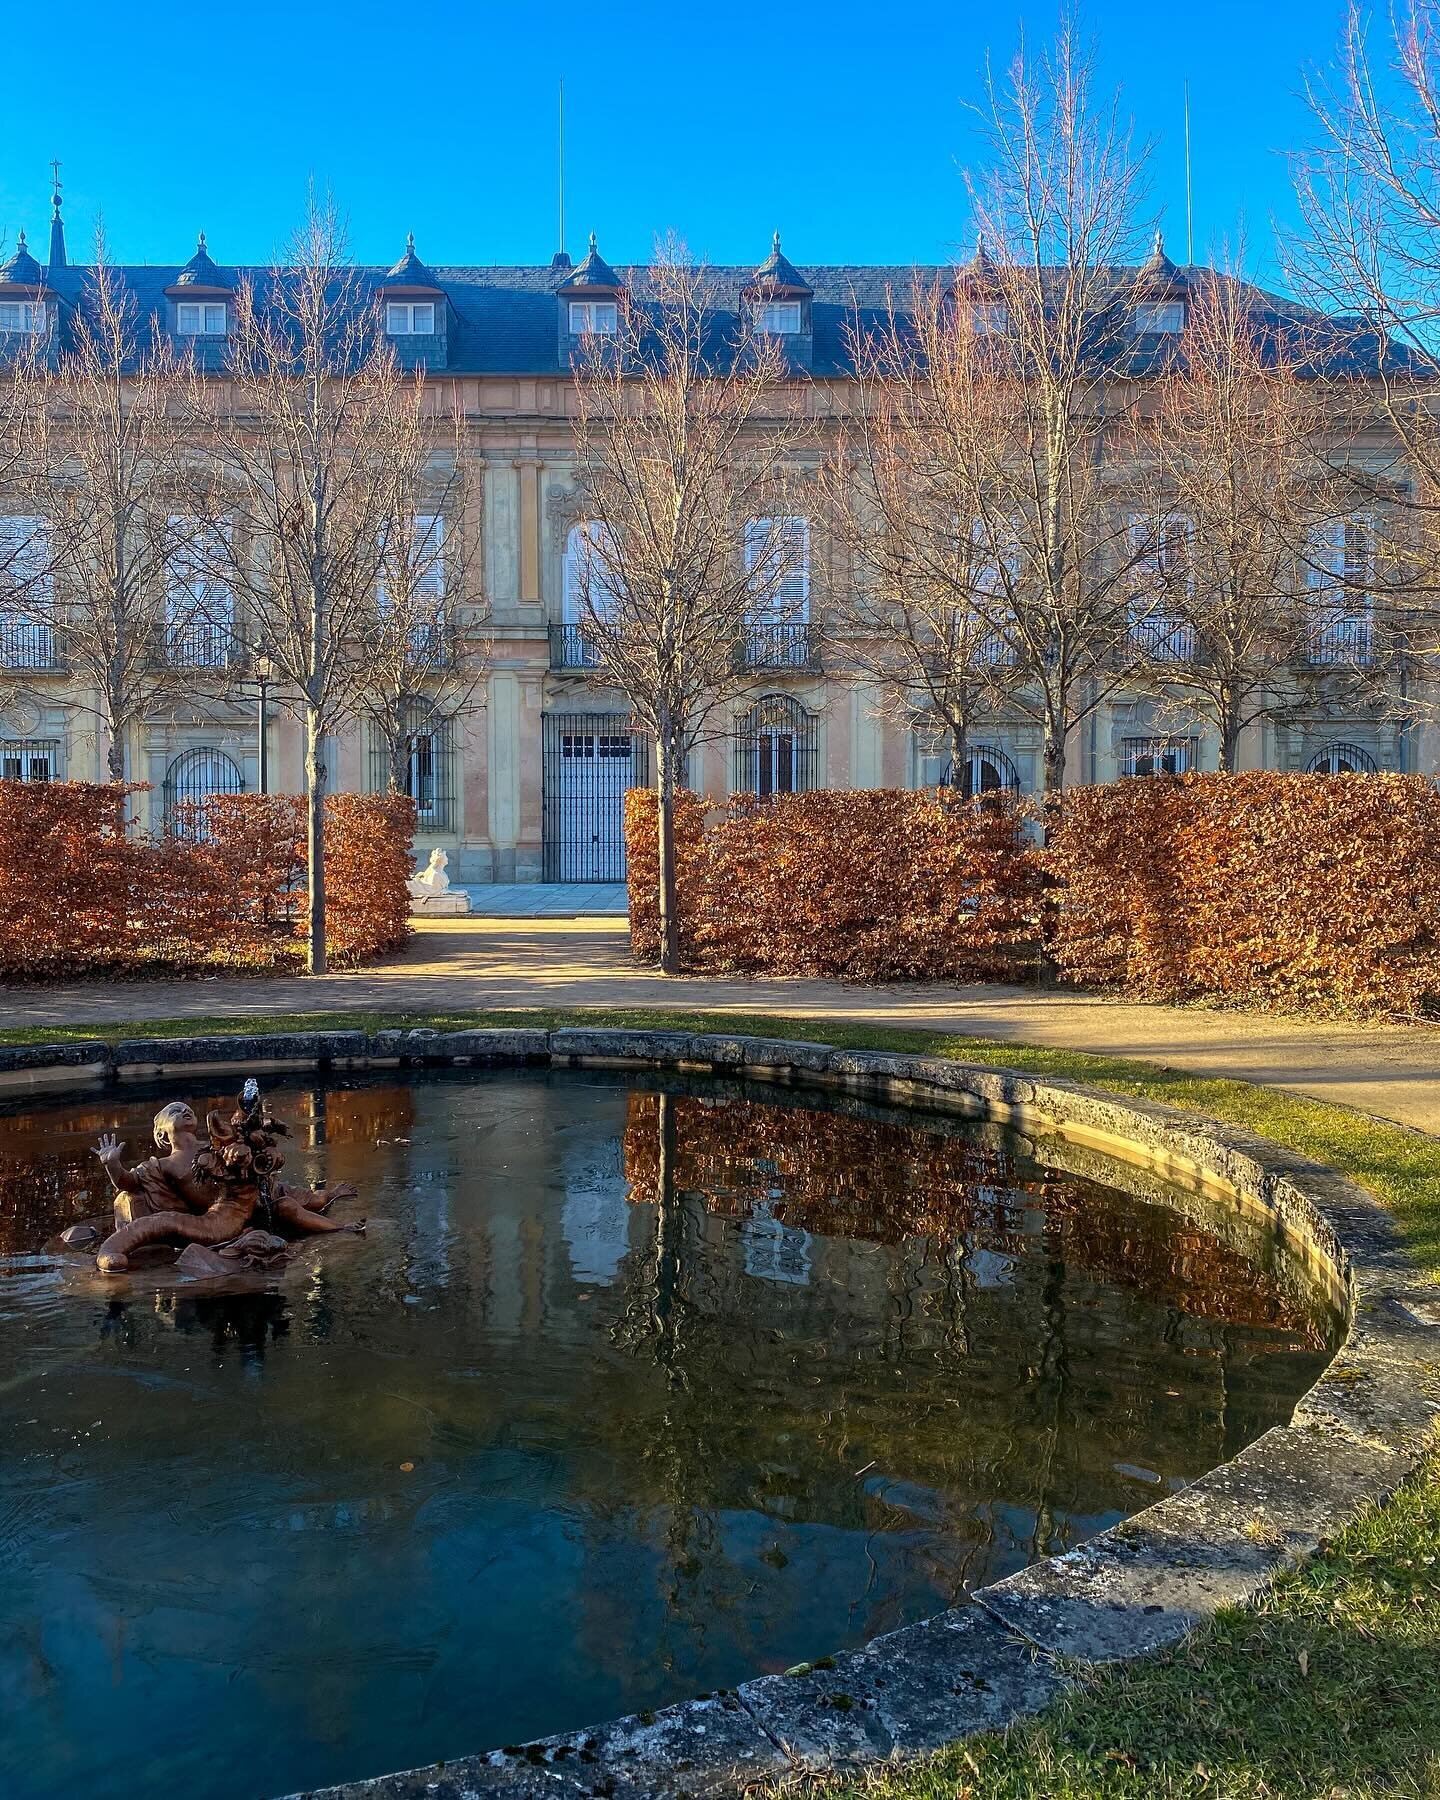 We were lucky to be able to enjoy some winter sunshine in Spain over Christmas.

The Palace Gardens in La Granja are a fascinating superimposition of French formal garden style over a steeply sloping topography which culminates in a lake with a contr